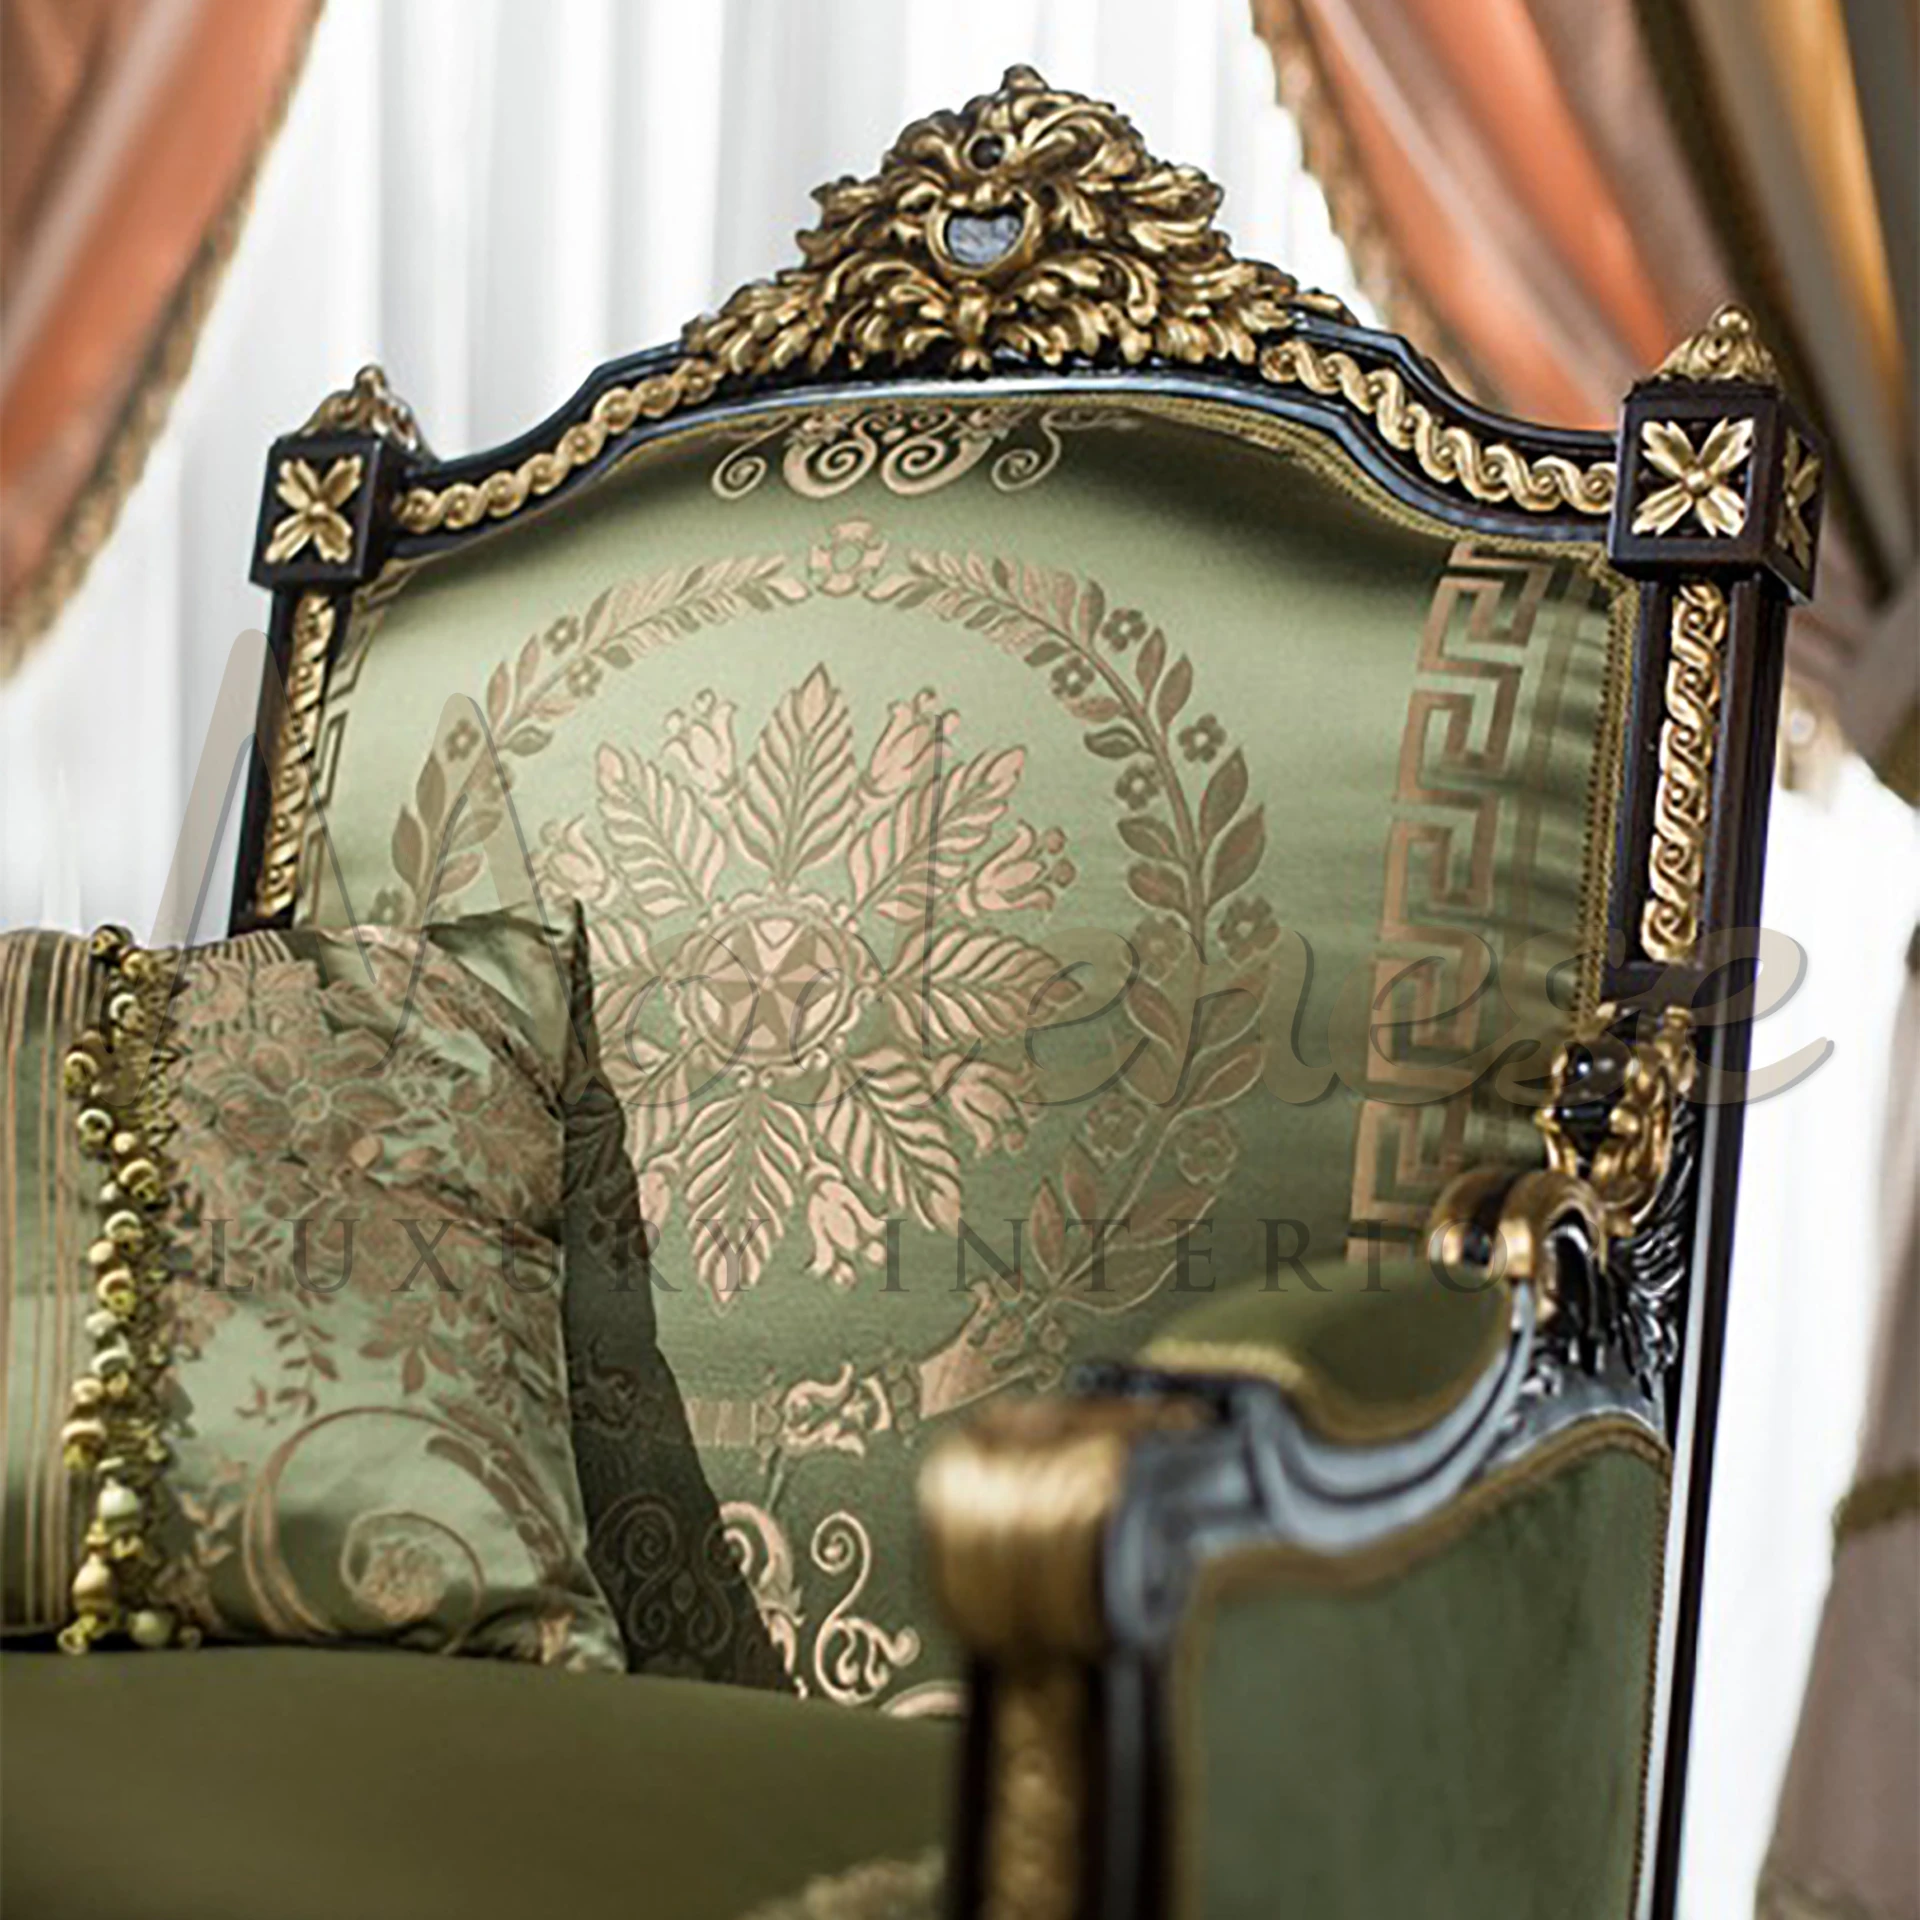 Plush emerald upholstered armchair featuring detailed gold leaf motifs on an antique black wooden frame with luxurious pillows.